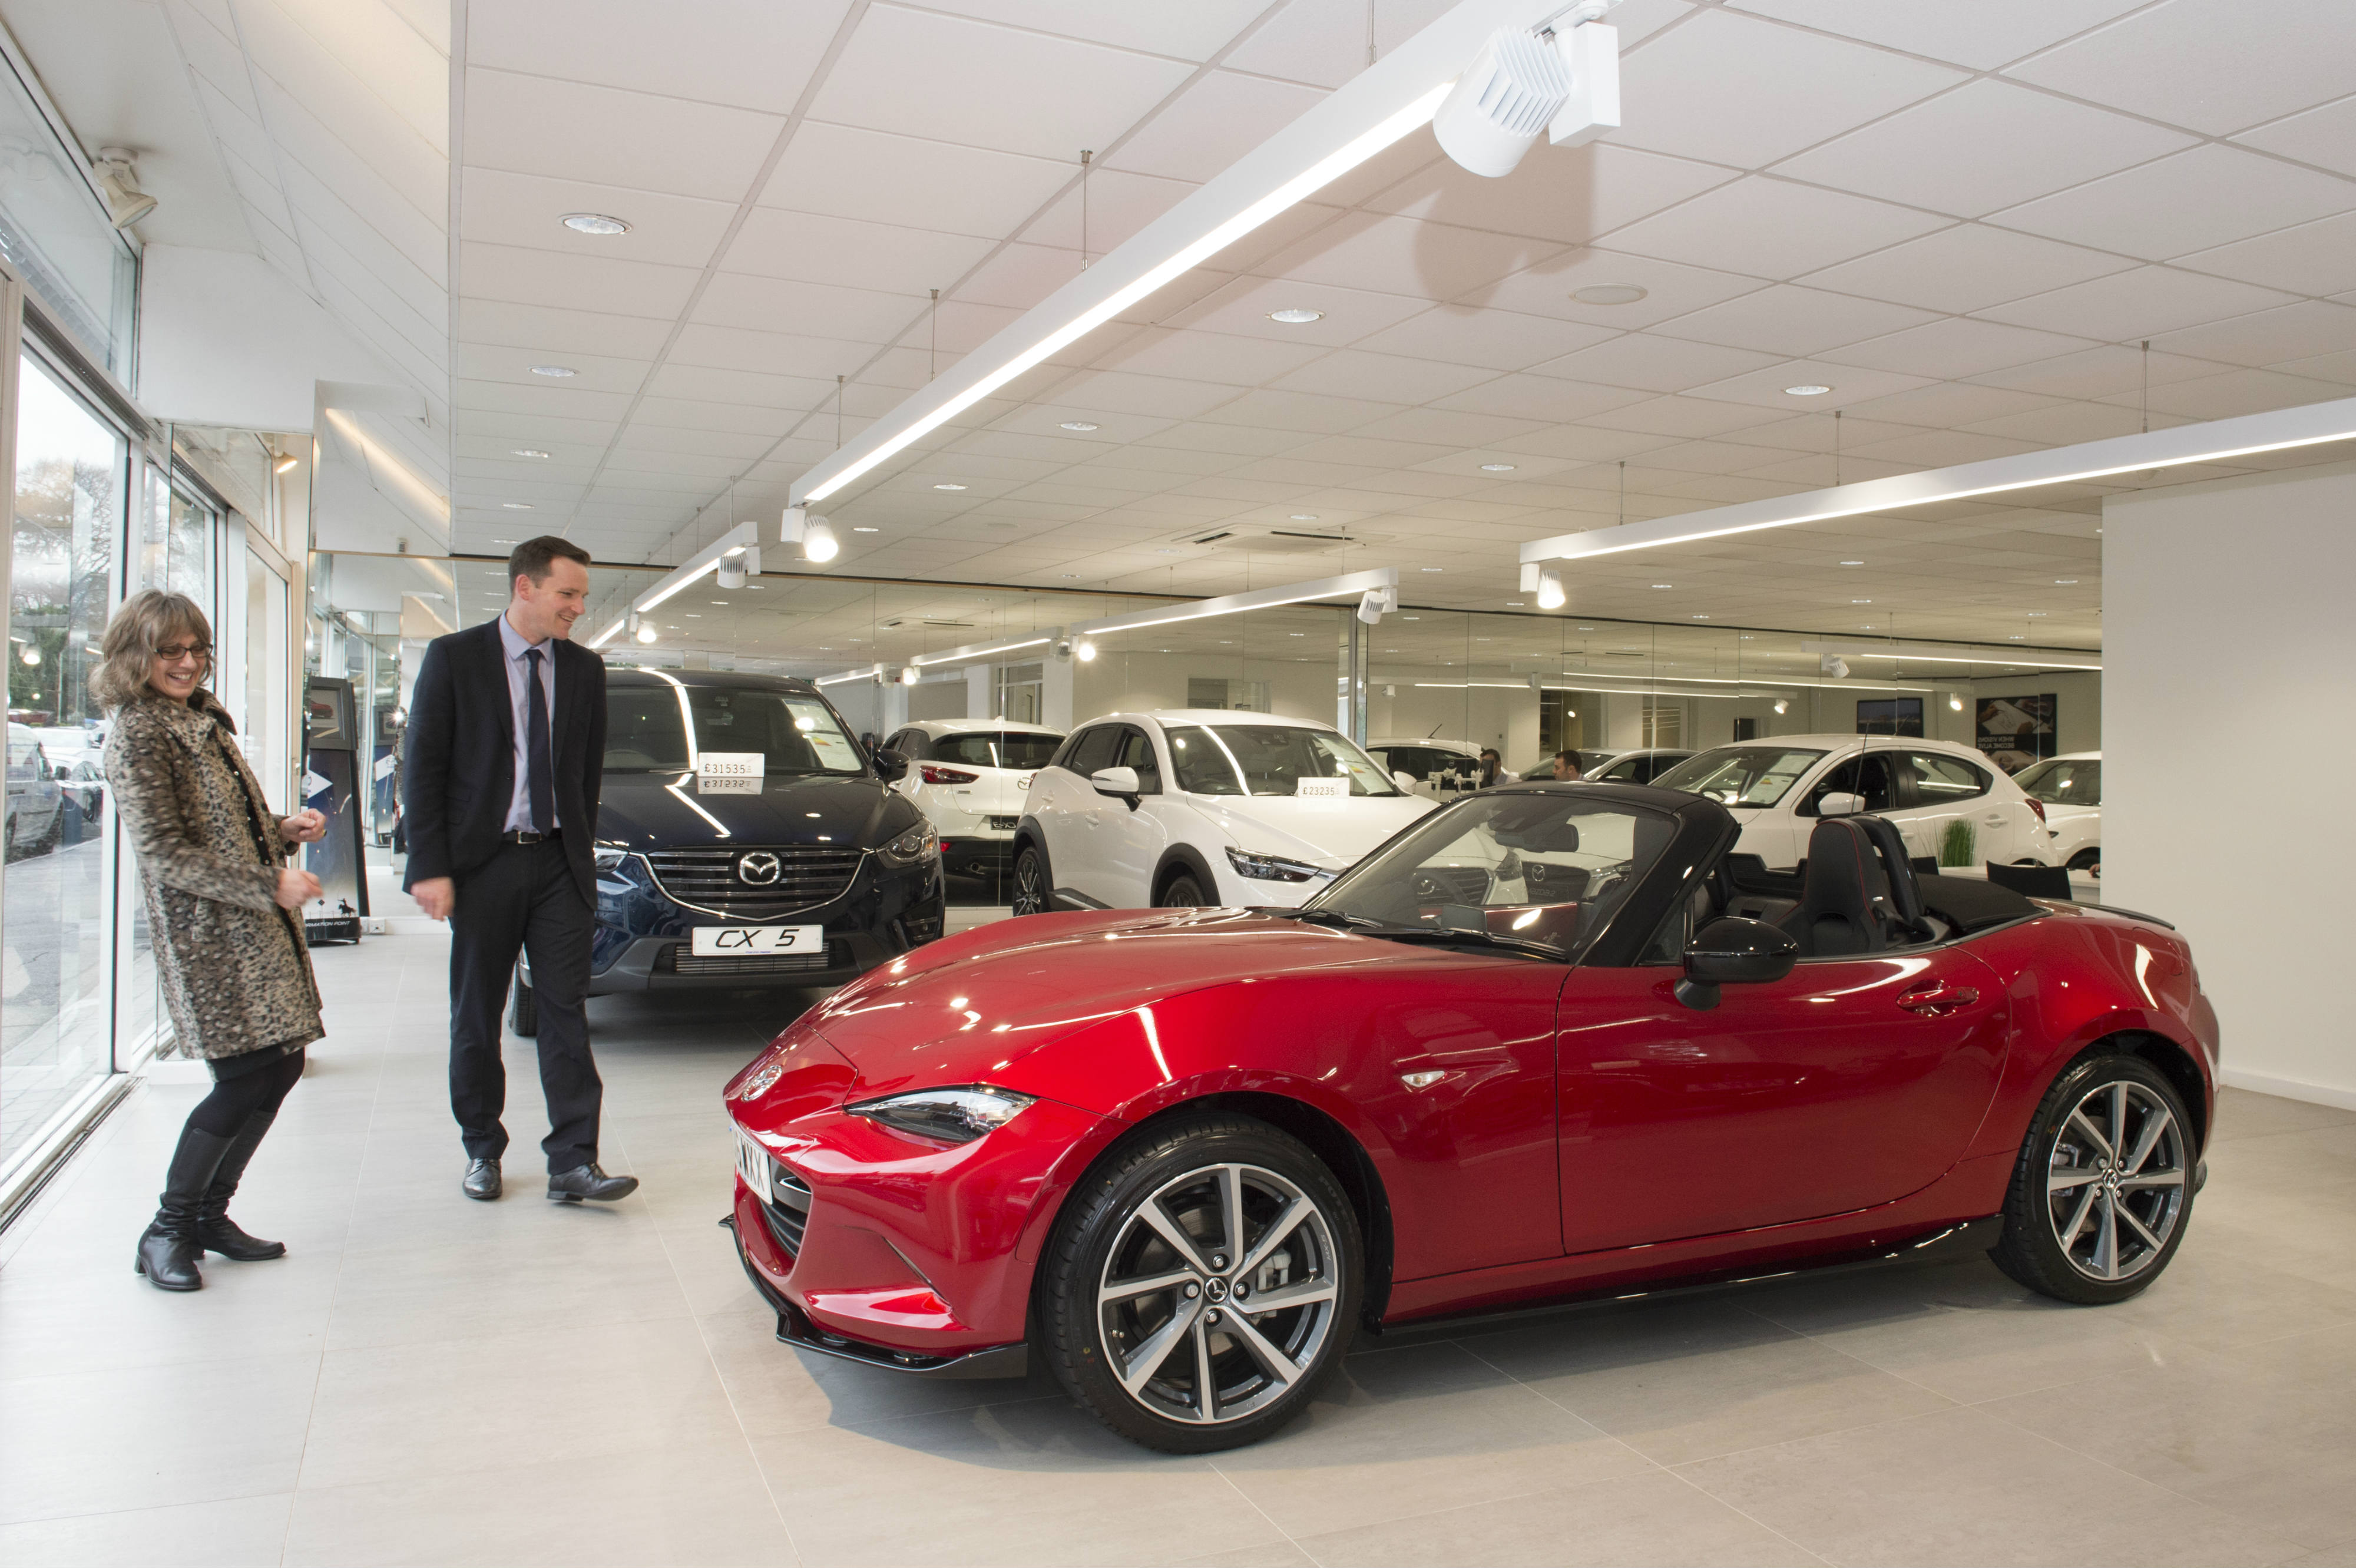 Special delivery: how Mazda supplies British drivers with new cars